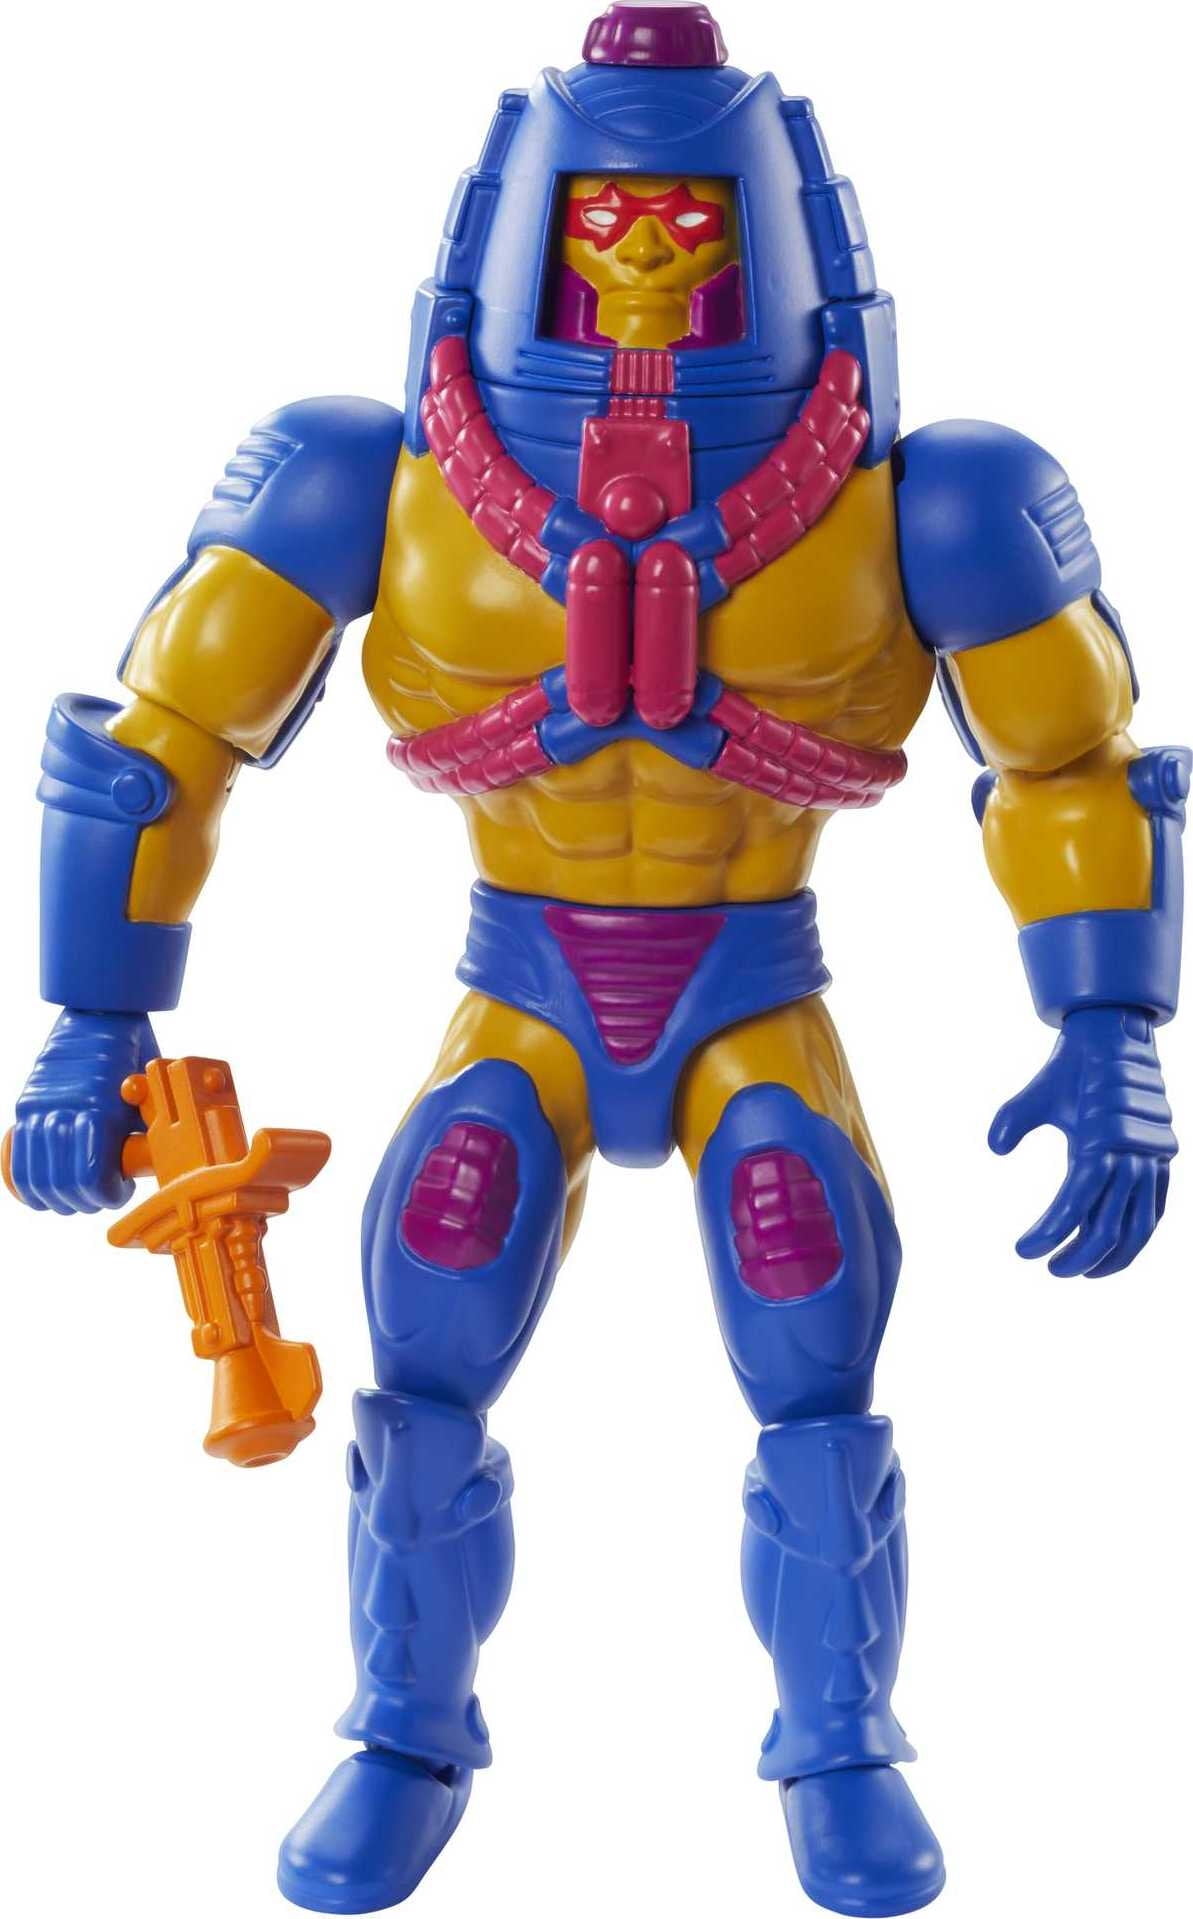 Mattel Masters of The Universe Man at Arms 5.5 inch Action Figure for sale online